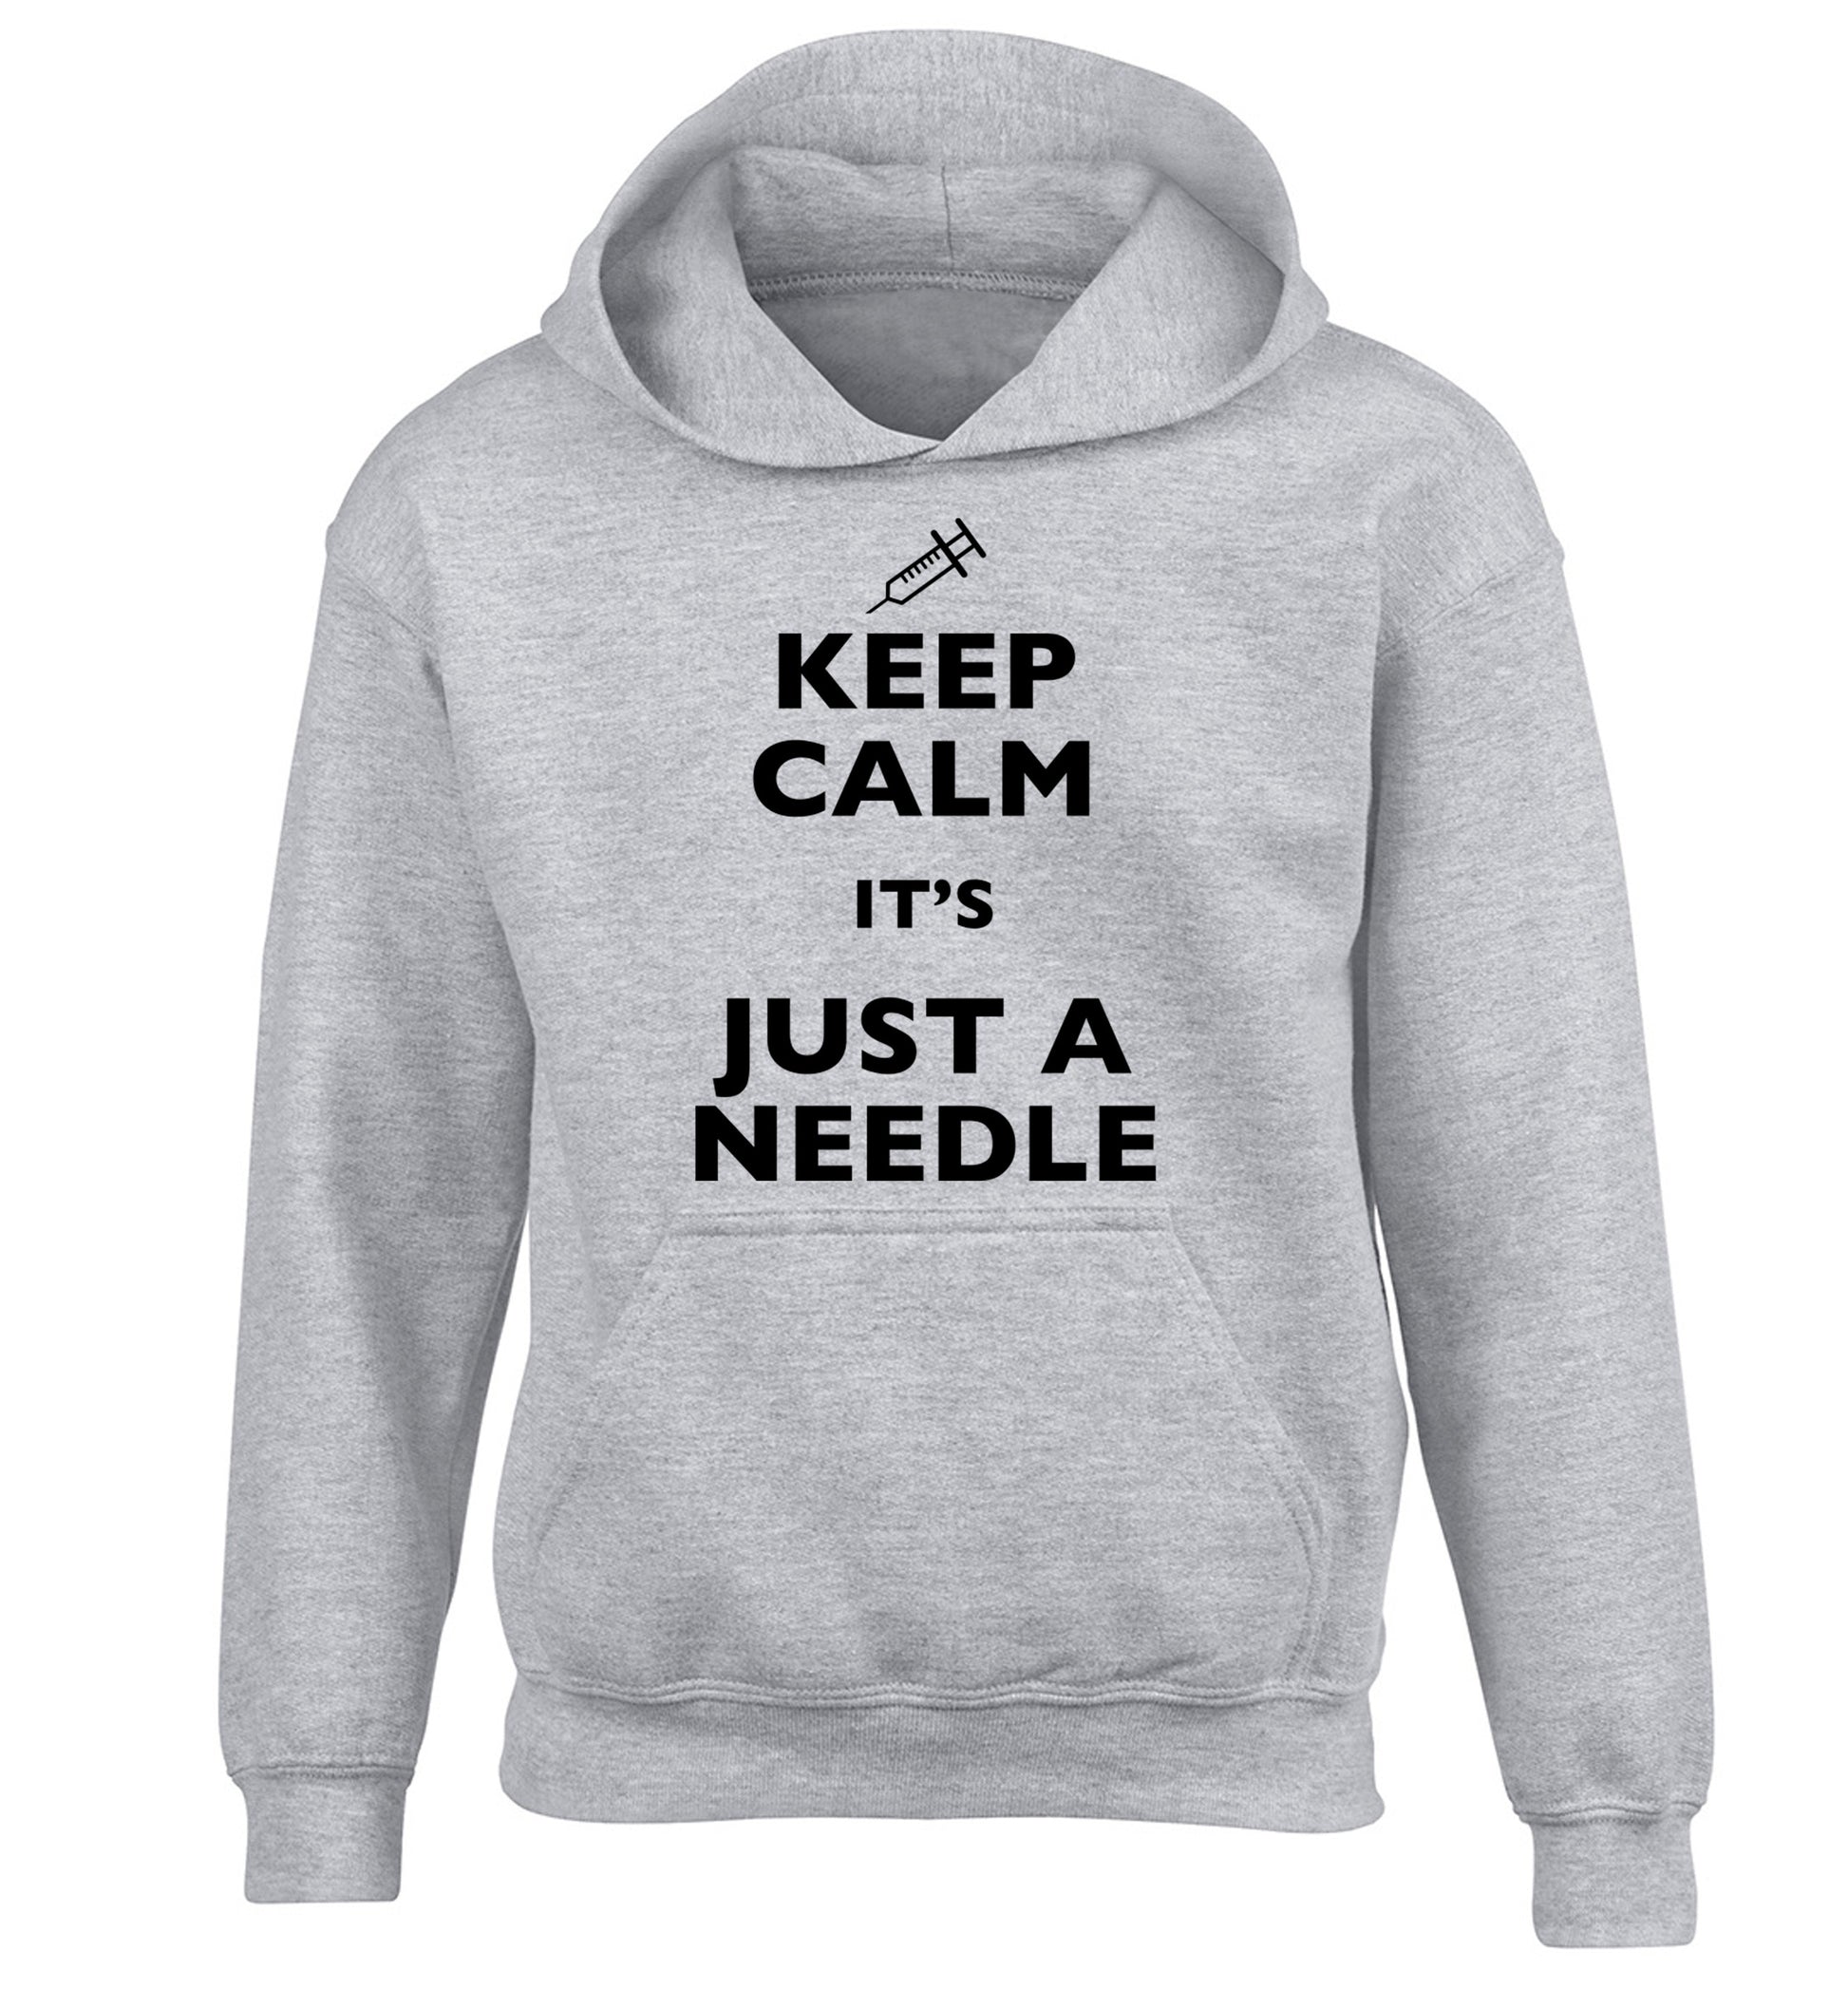 Keep calm it's only a needle children's grey hoodie 12-14 Years